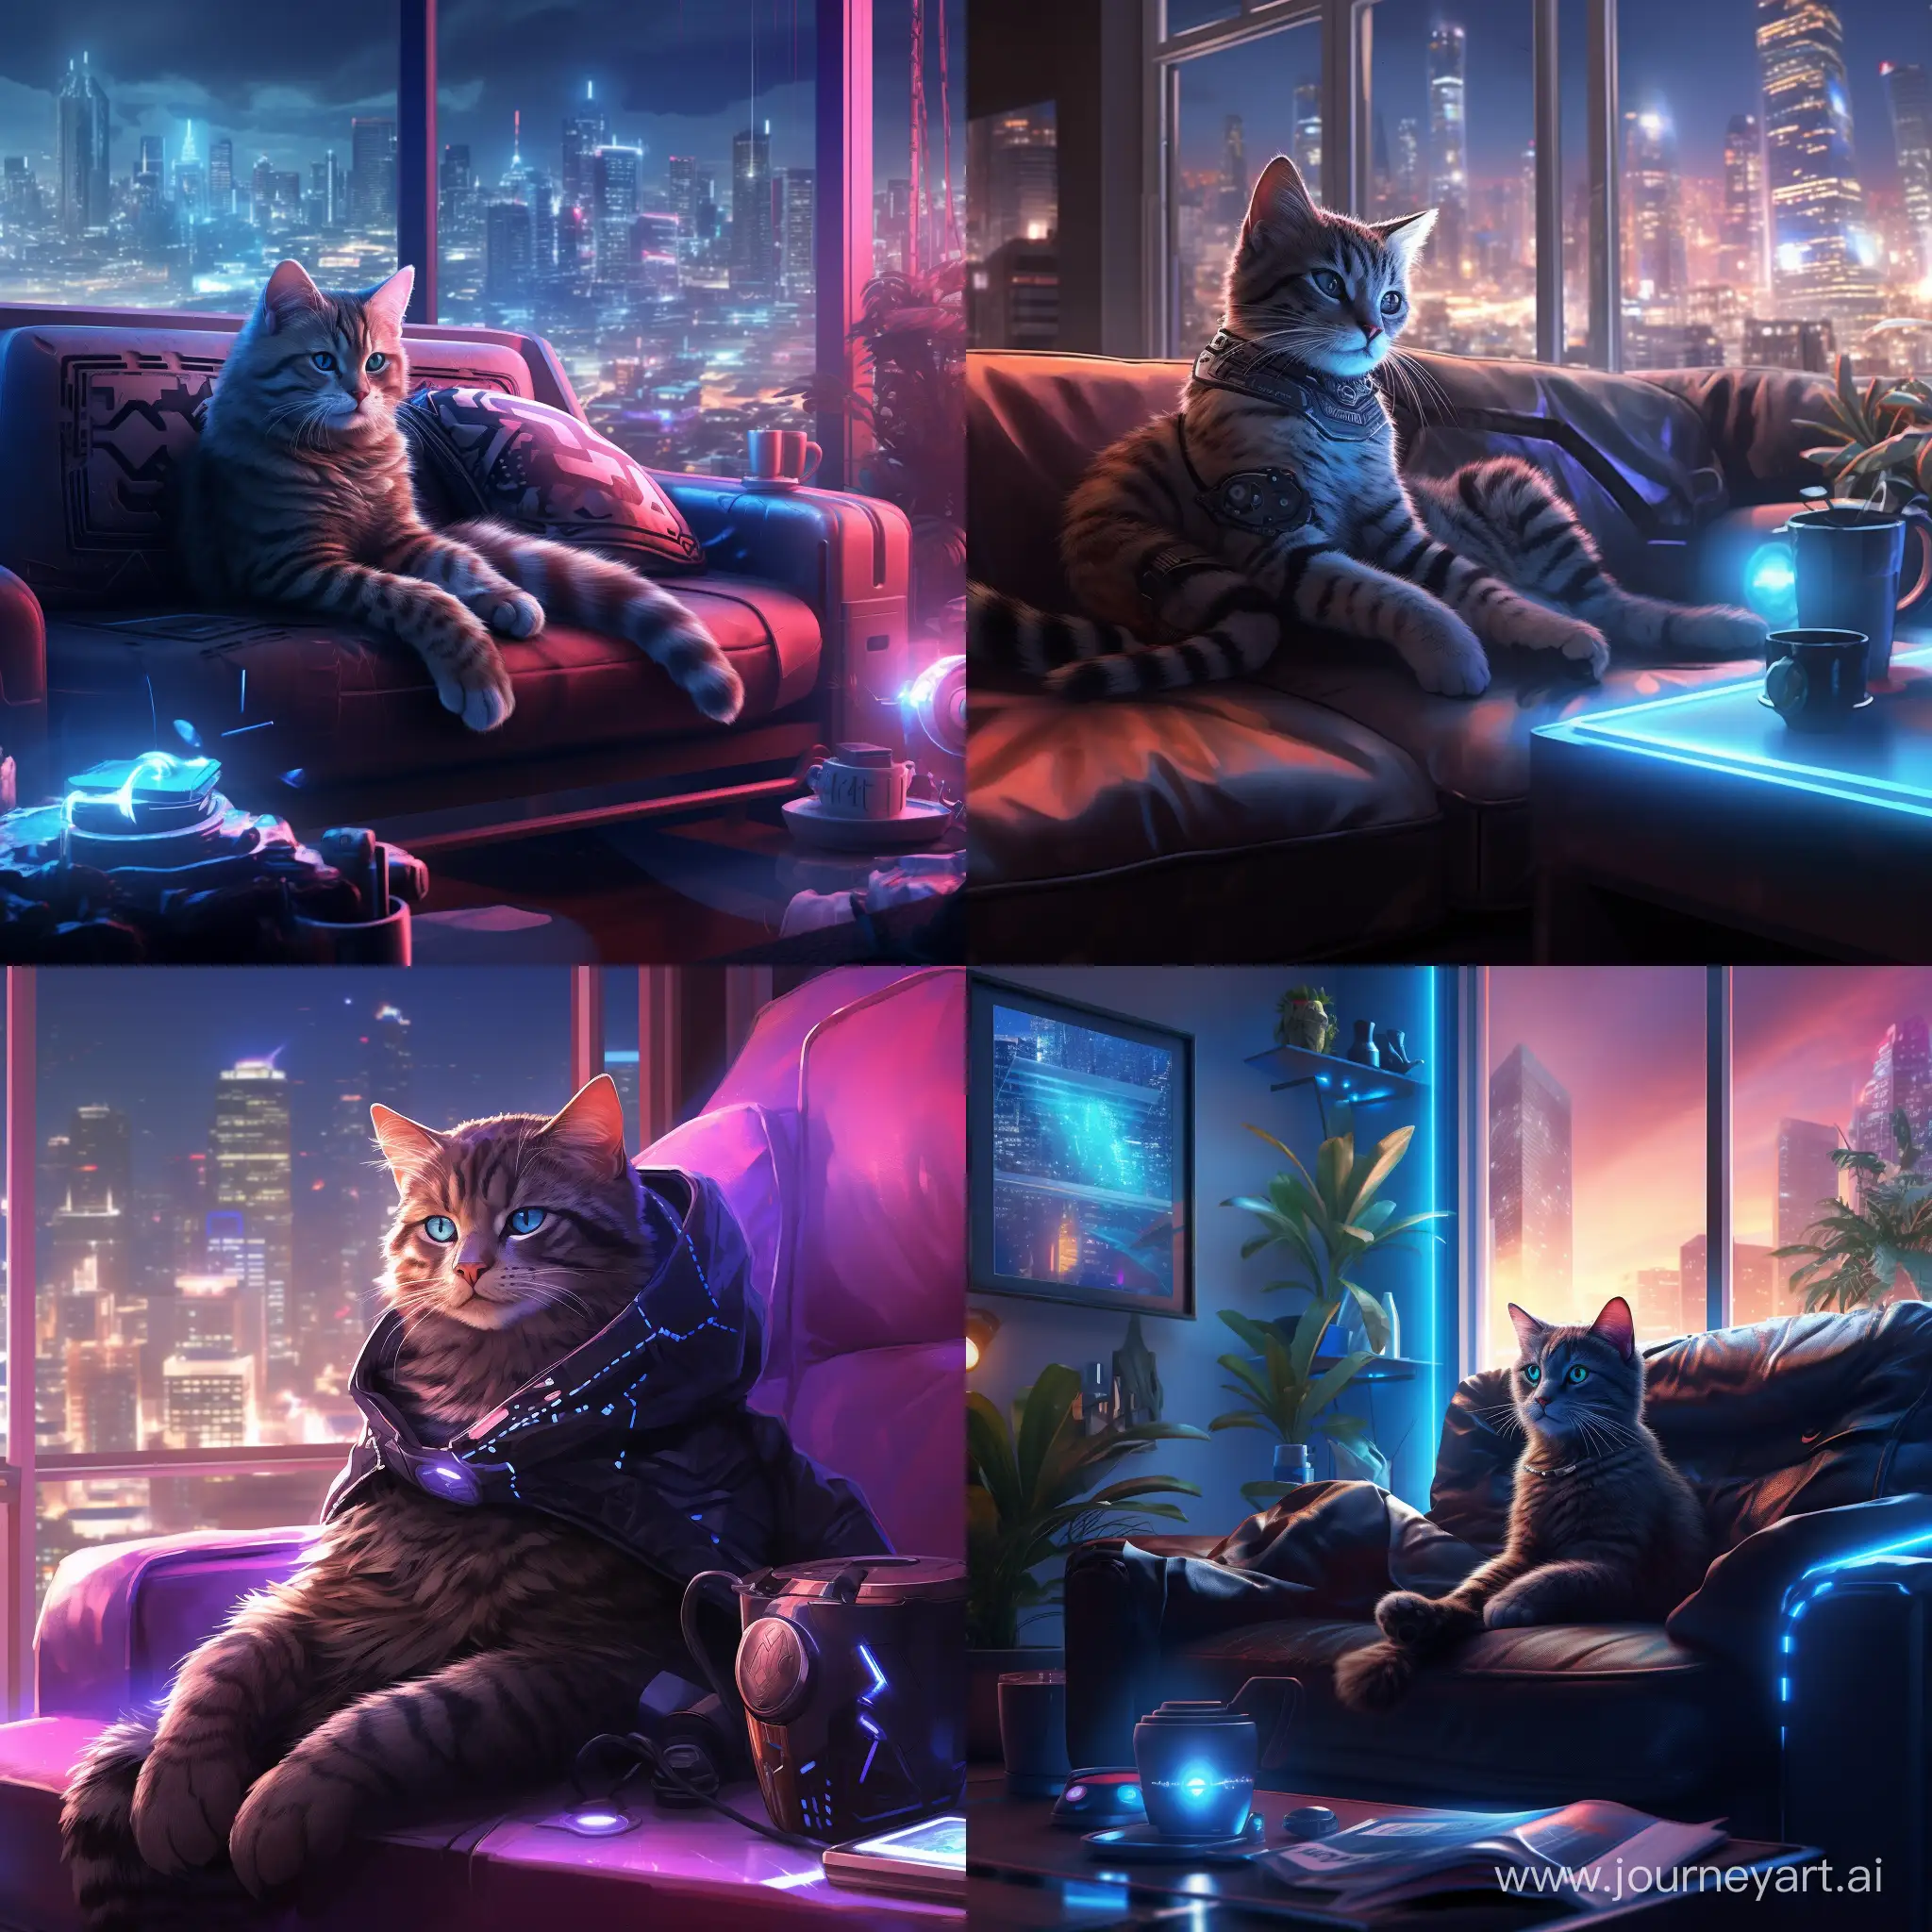 Futuristic-Cyberpunk-Cat-with-Glowing-Blue-Eyes-Relaxing-on-a-Couch